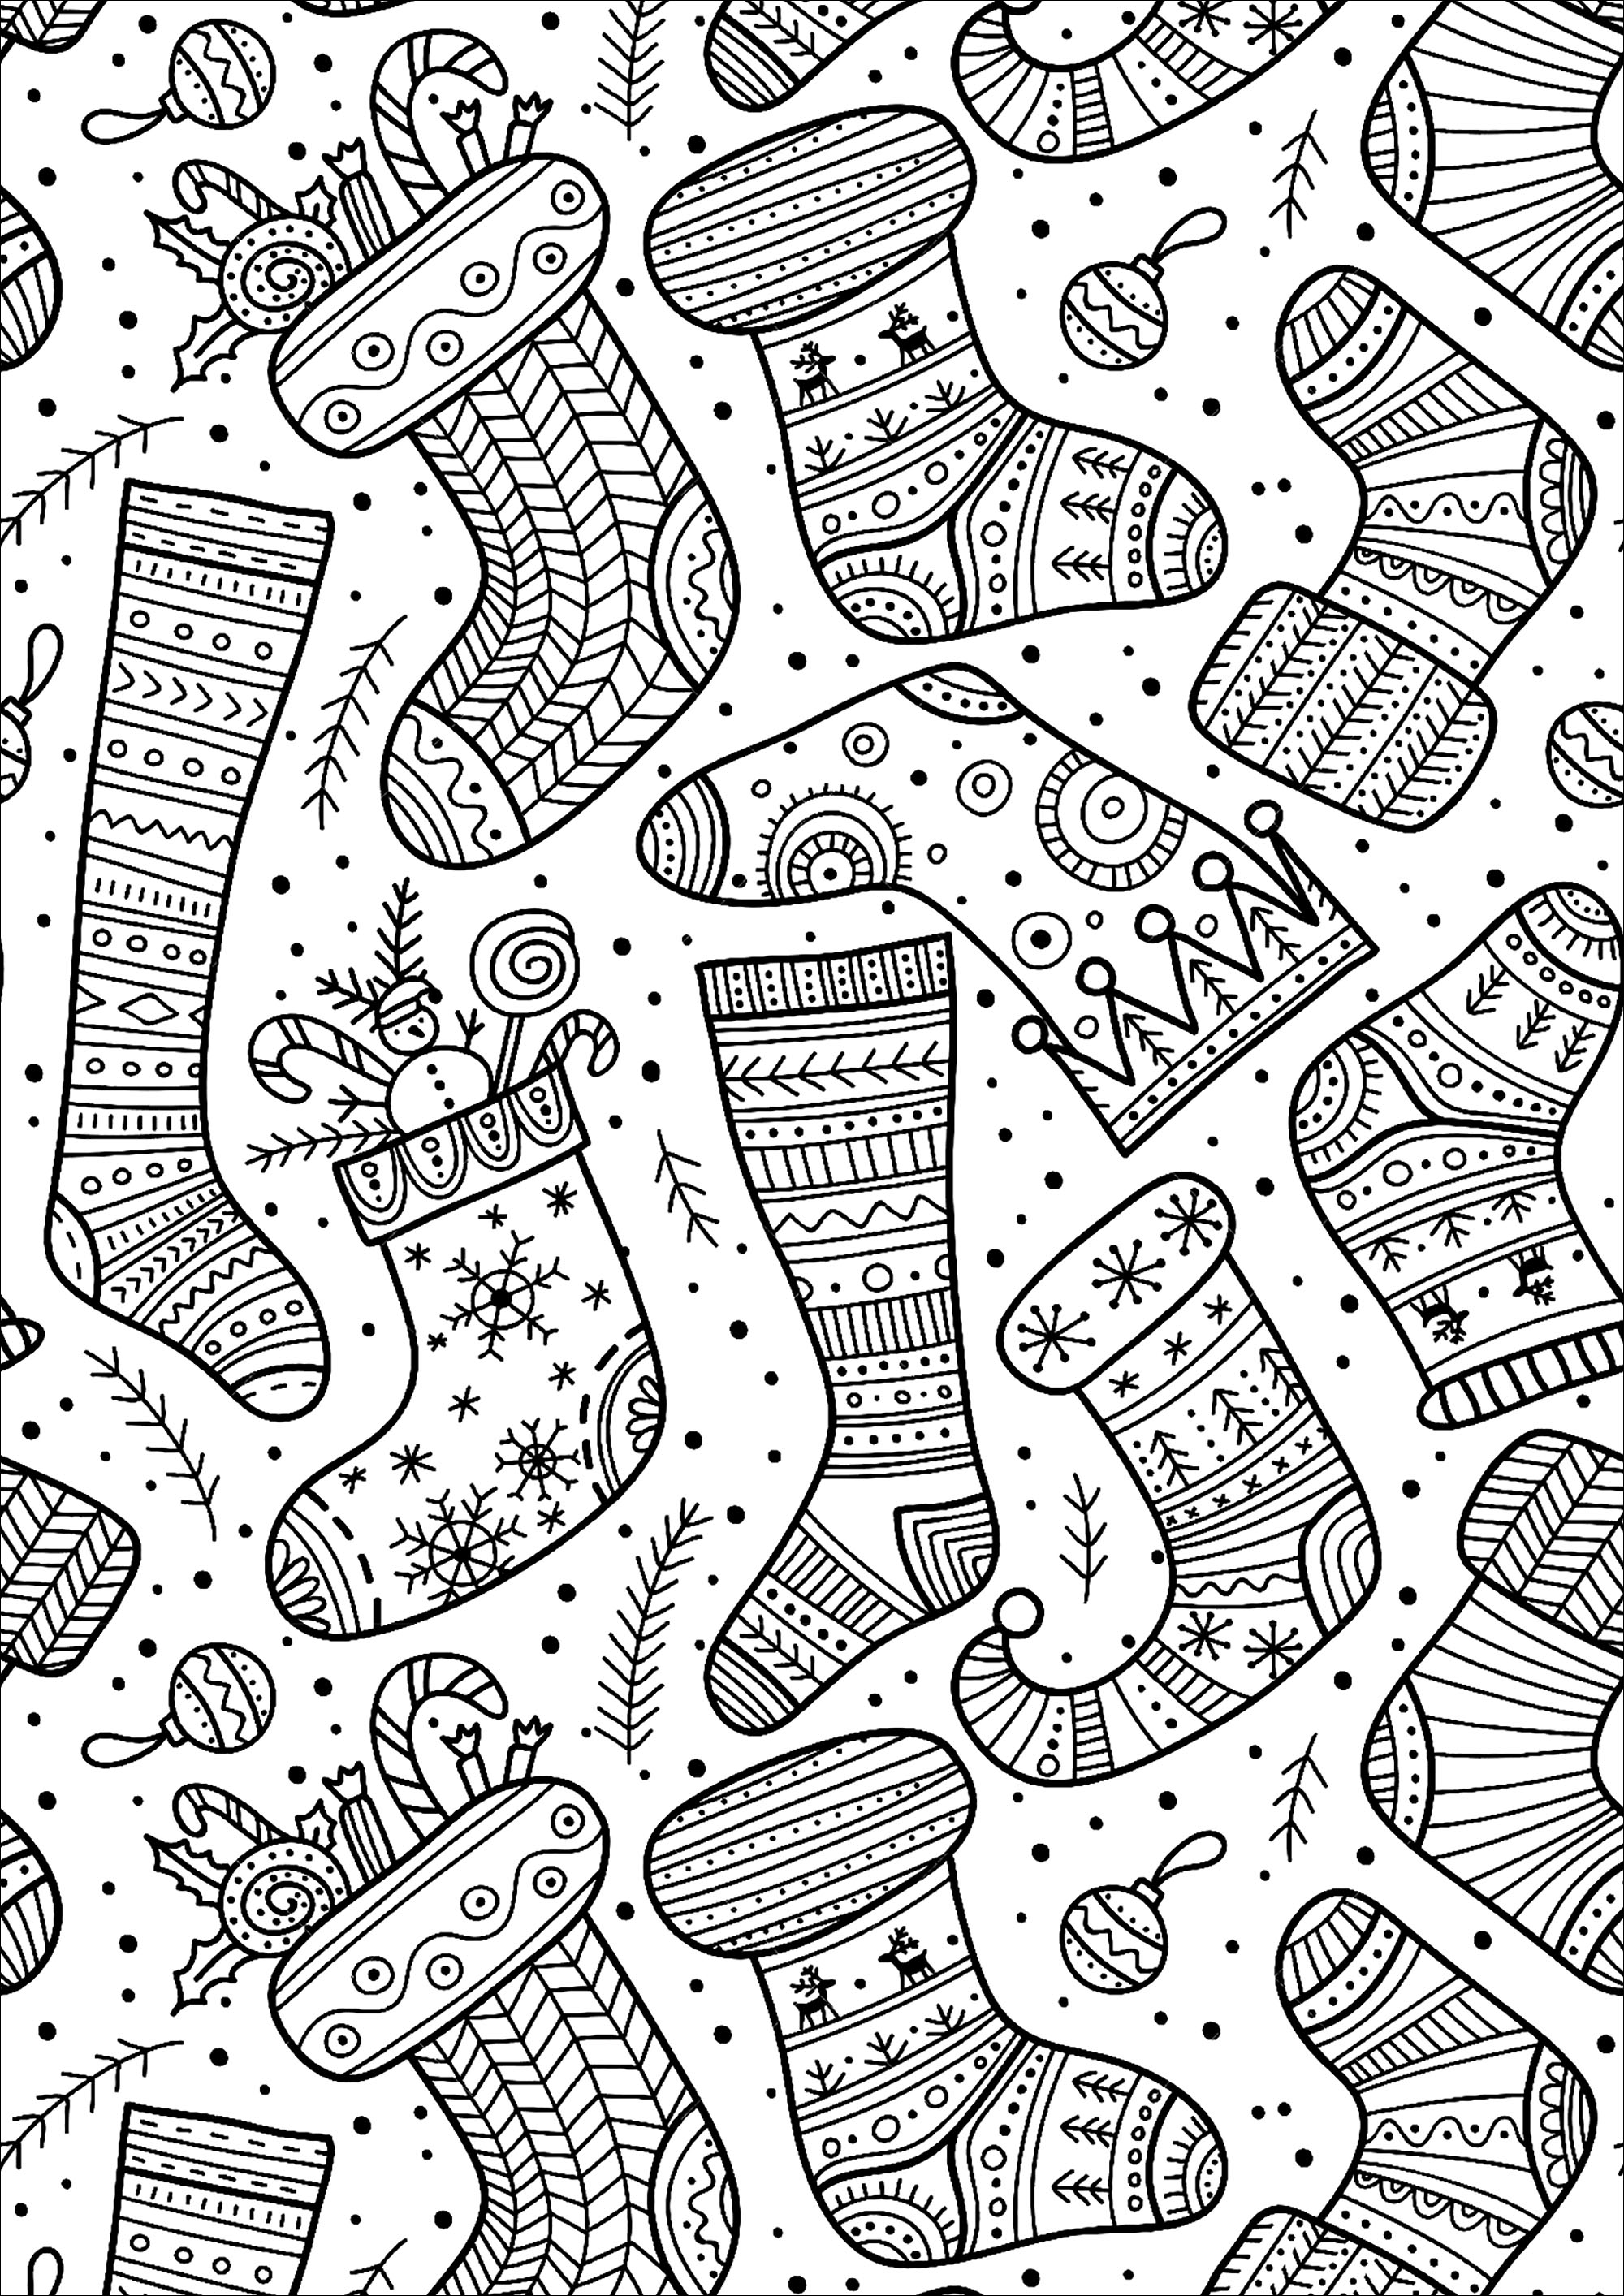 Cute Christmas socks with various and happy designs